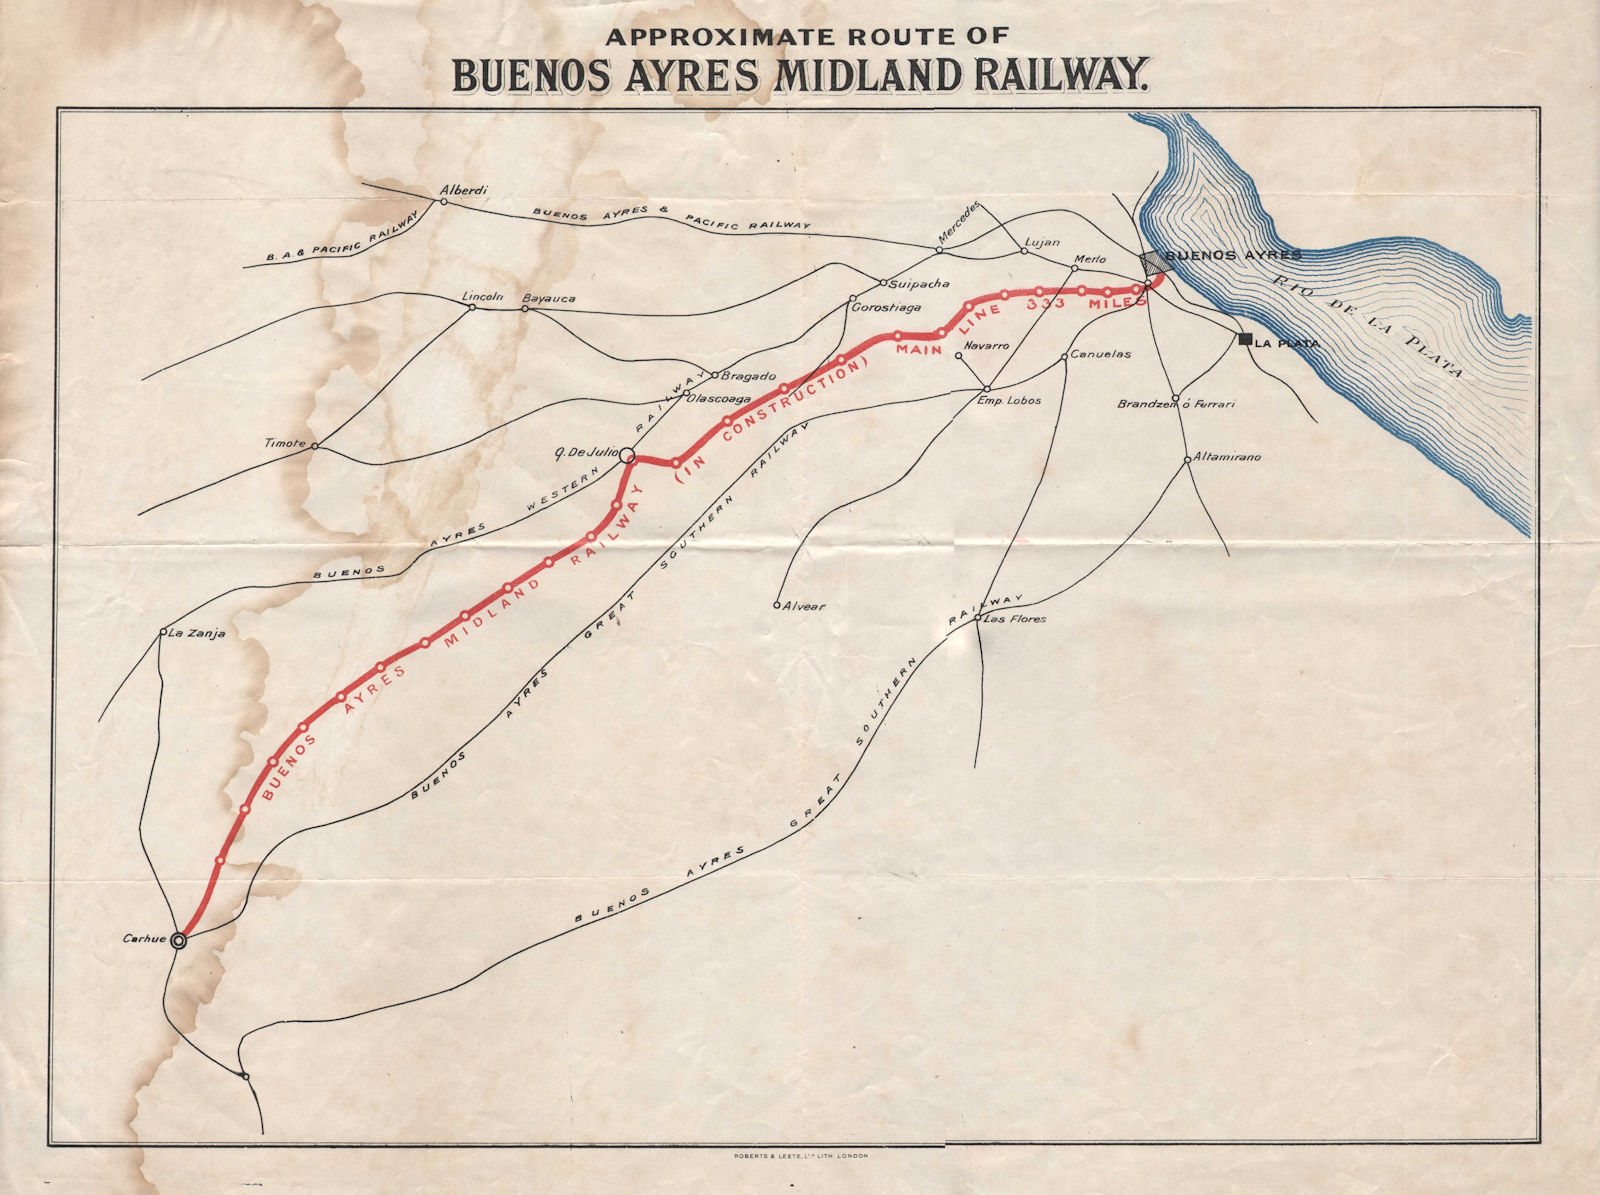 Associate Product Buenos Ayres Midland Railway route map Ferrocarril Midland de Buenos Aires c1908